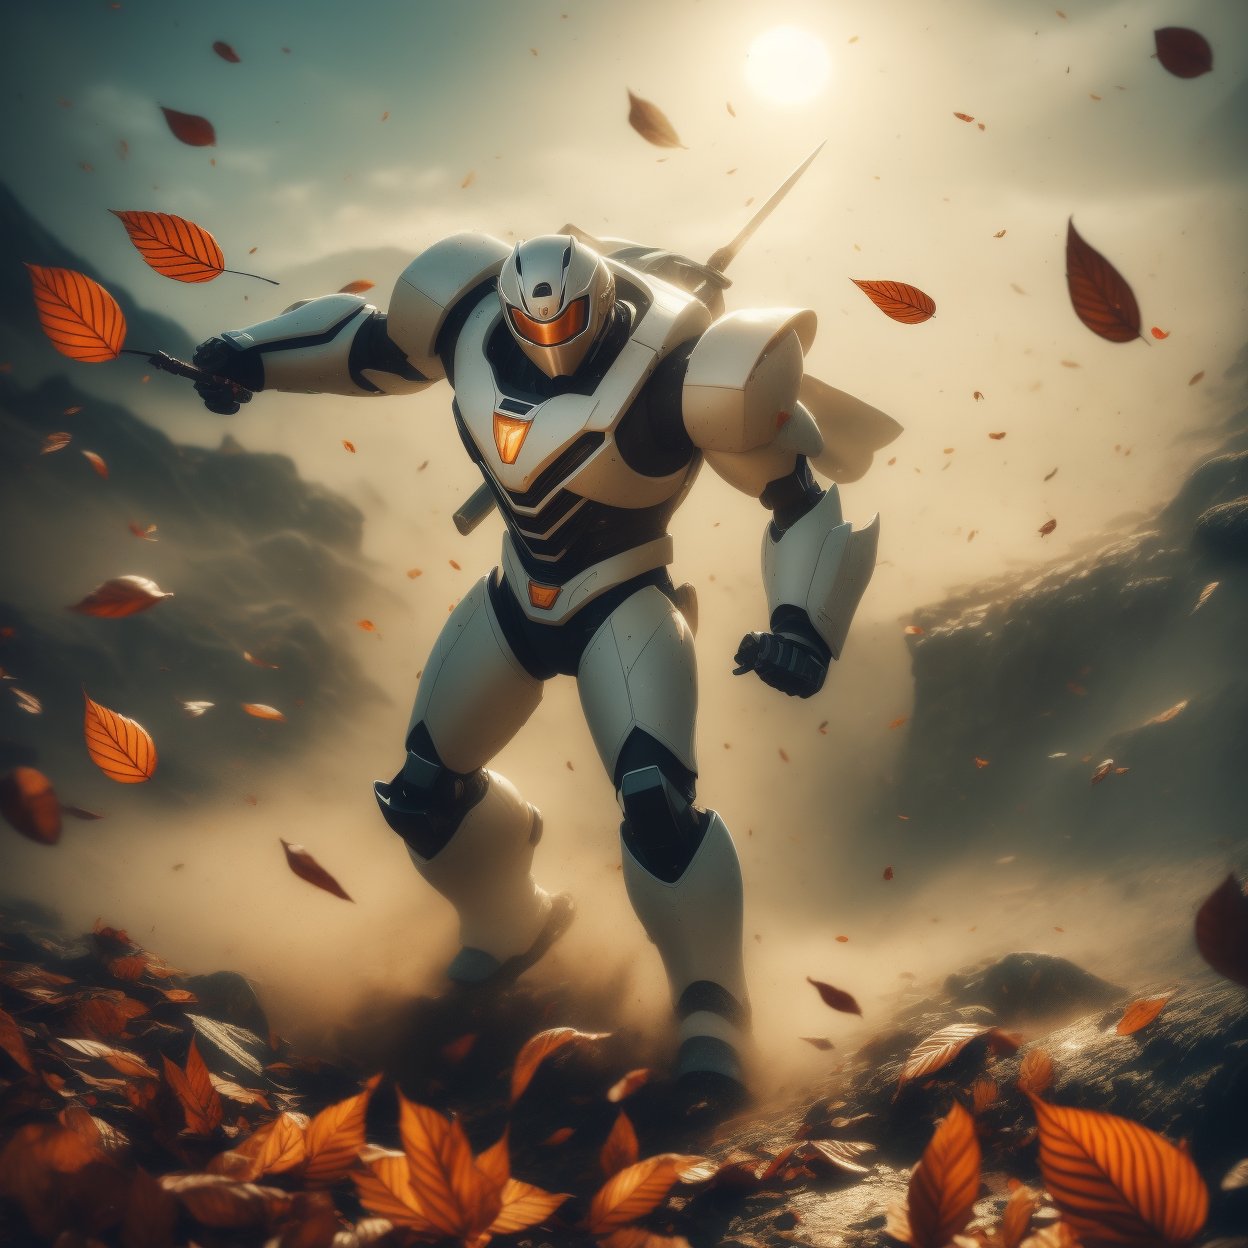 realistic image, vintage style picture, full body, 1man, dinamic_pose, intricate cyber mecha ninja steel armour, white mecha armor, masked, mecha suit, holding a sword, fighting stance pose, autumn leaf drop to the ground, seround by mist, gritty, dusty, fantastical, photohyperrealistic, highly detailed, hyper realistic, with dramatic polarizing filter, sharp focus, HDR, UHD, 64K, 16mm, color graded portra 400 film, remarkable color, ultra realistic,,ABMautumnleaf